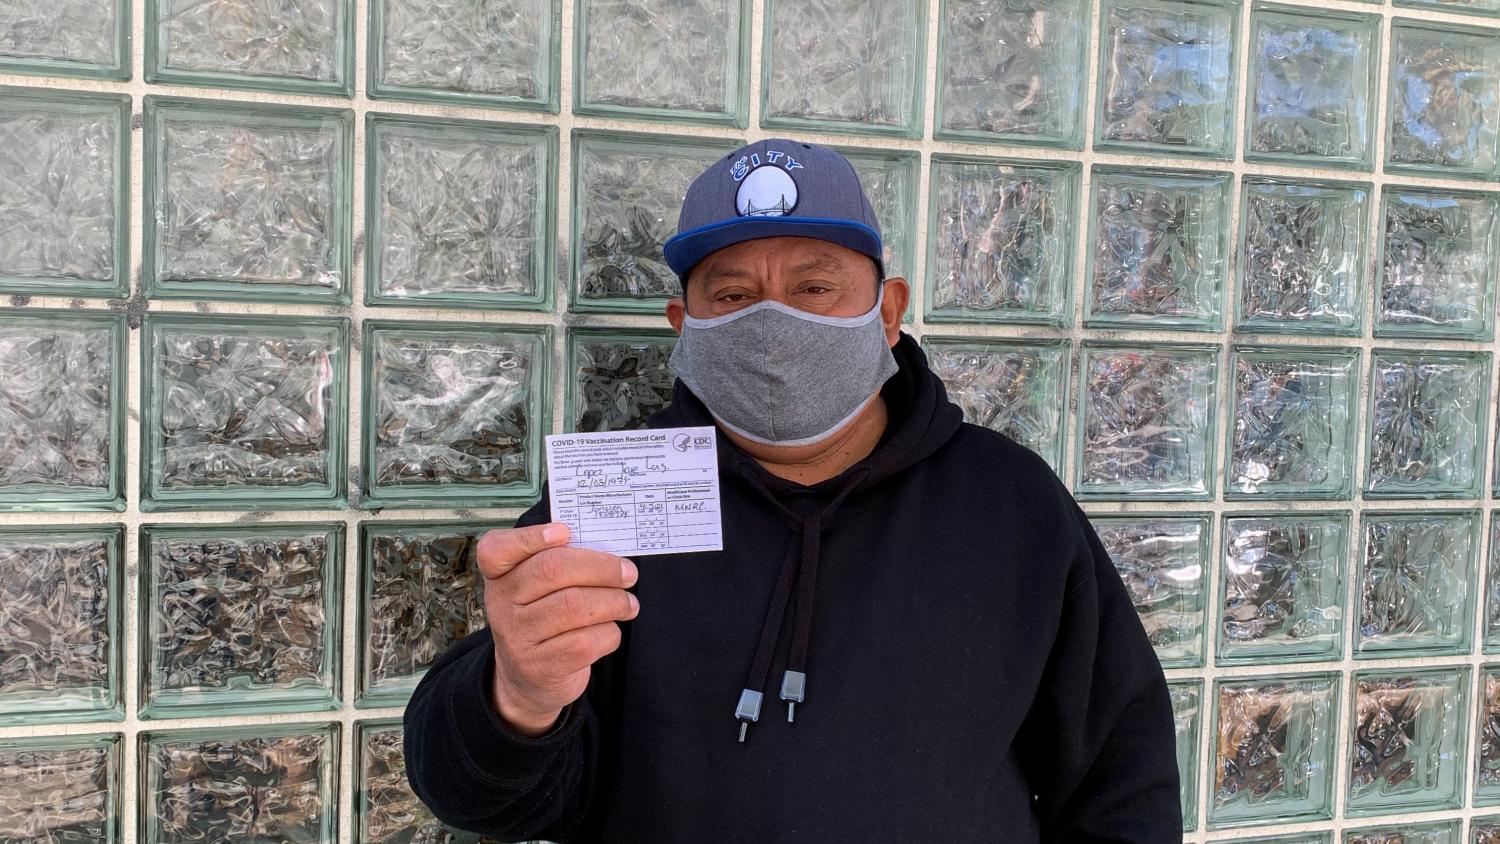 A Latino man wearing a mask, stands in front of a building, holding his proof of vaccination card